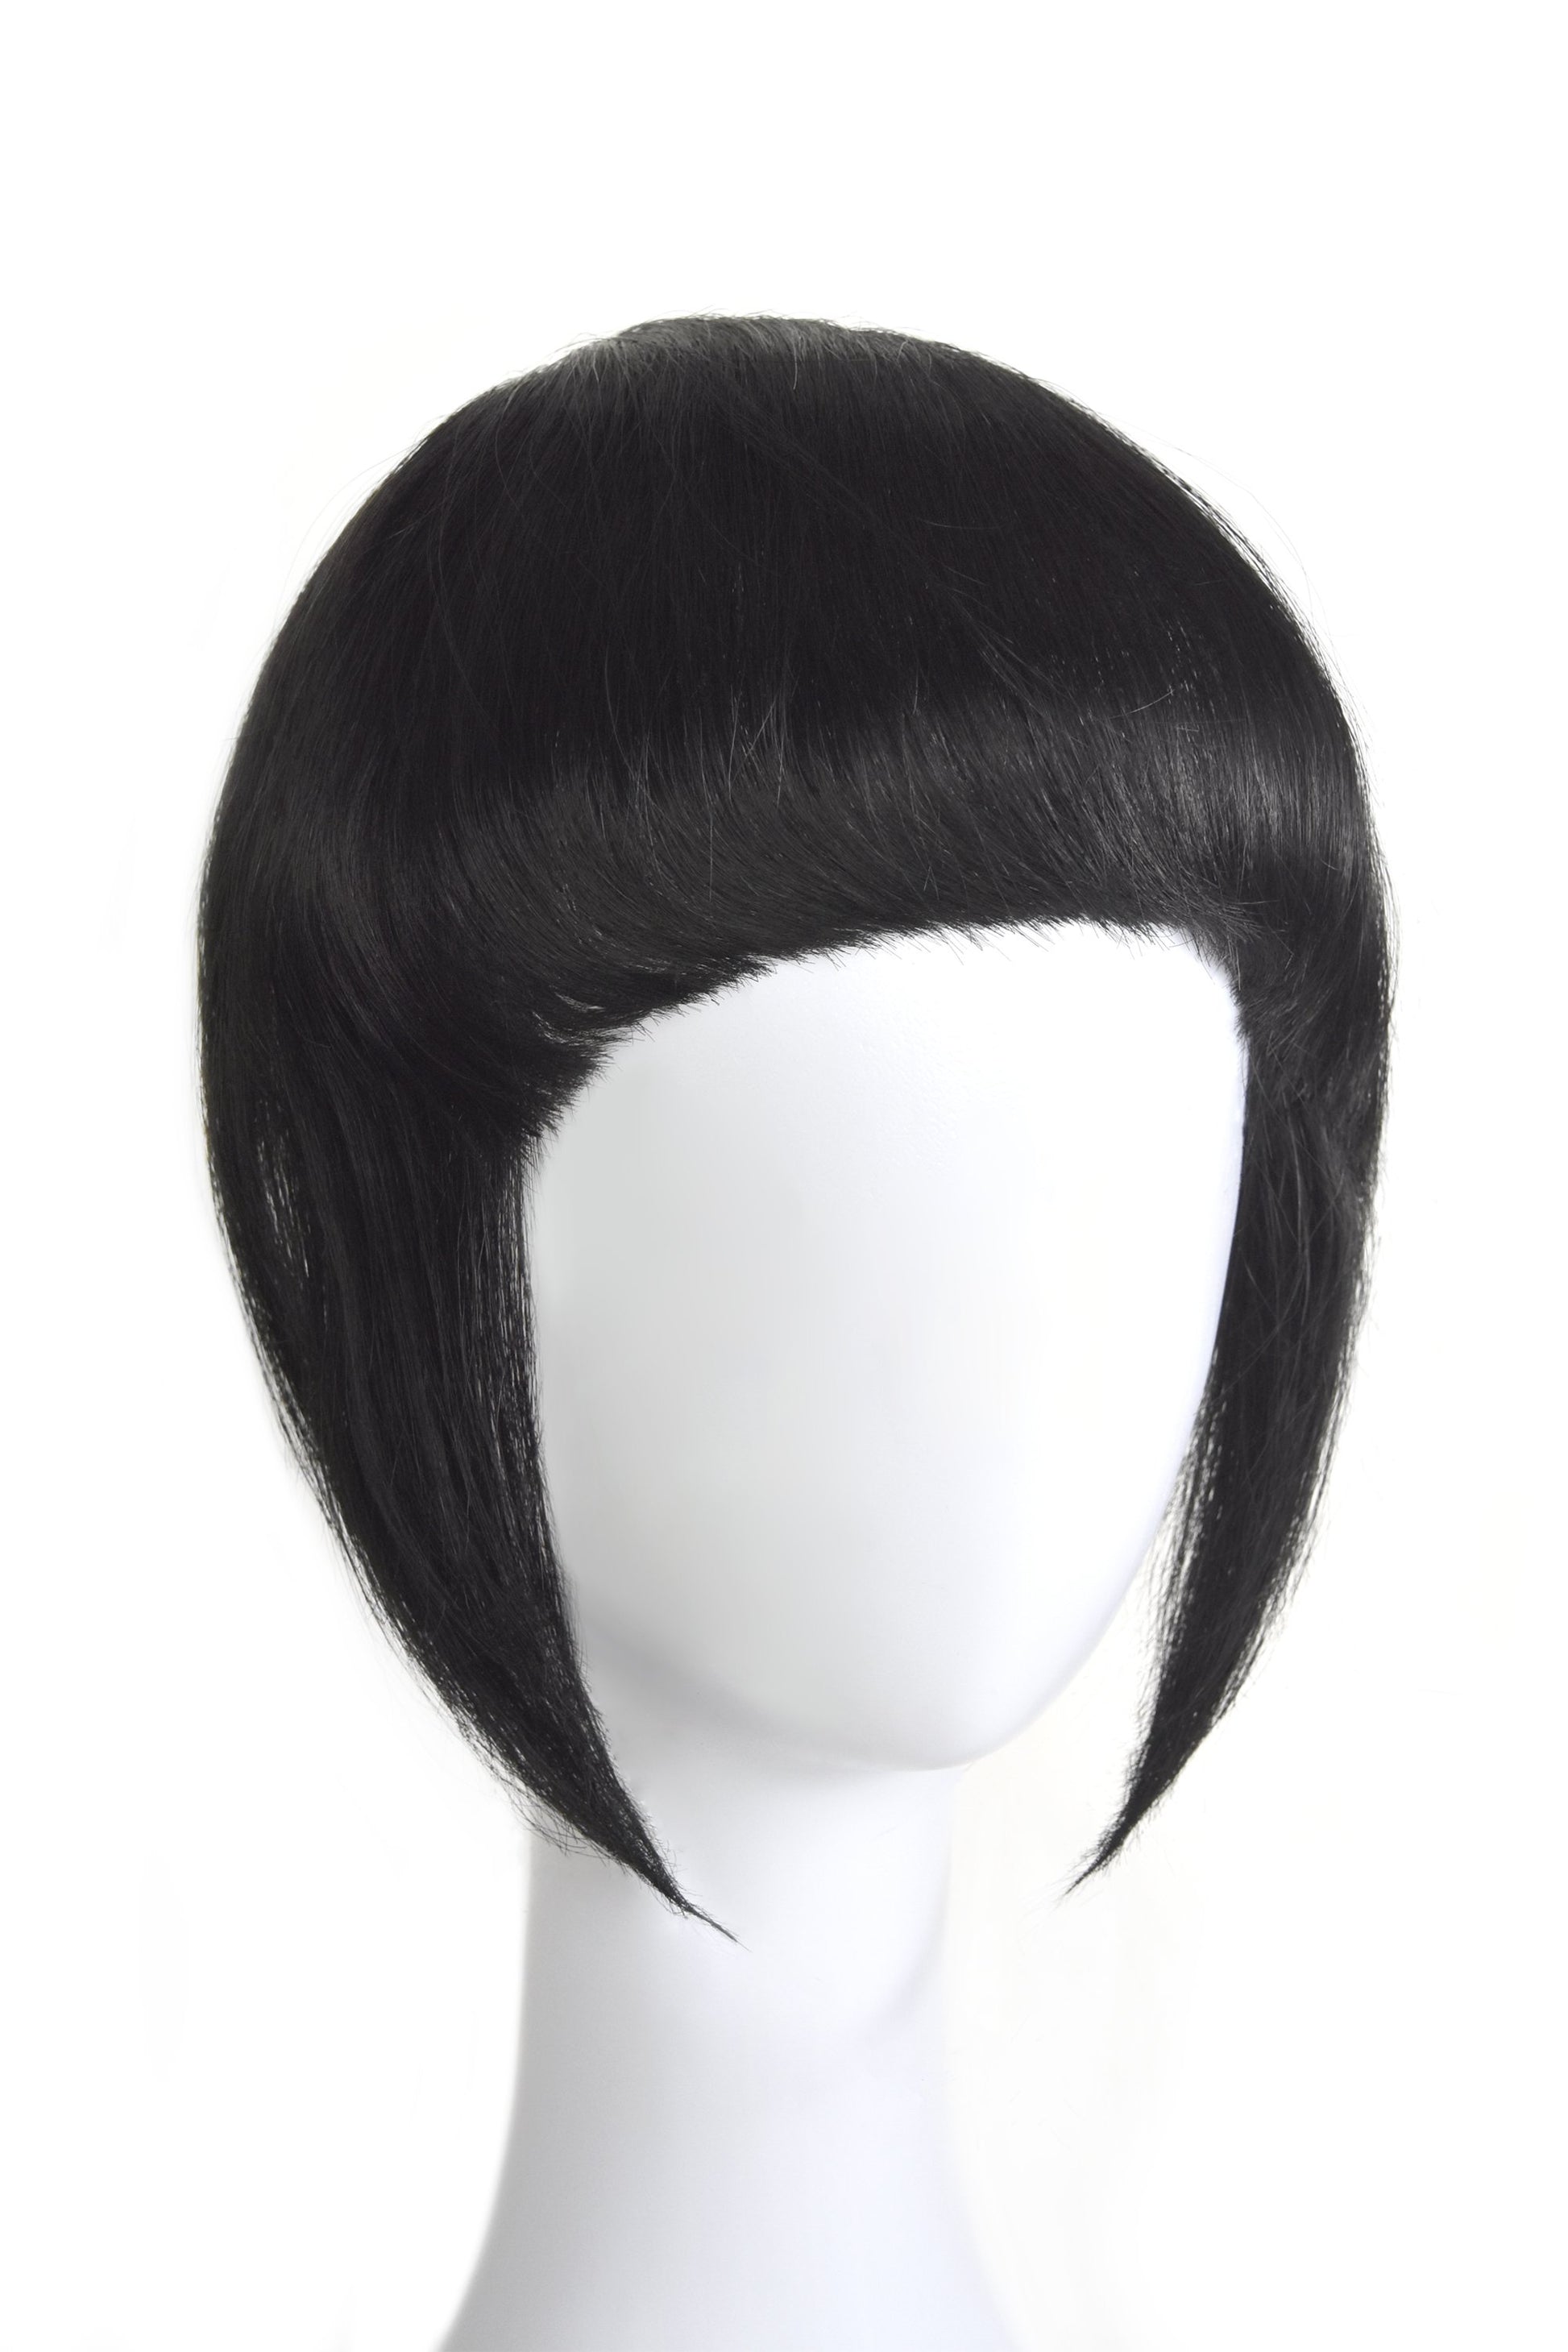 clip in bangs made from best quality human hair